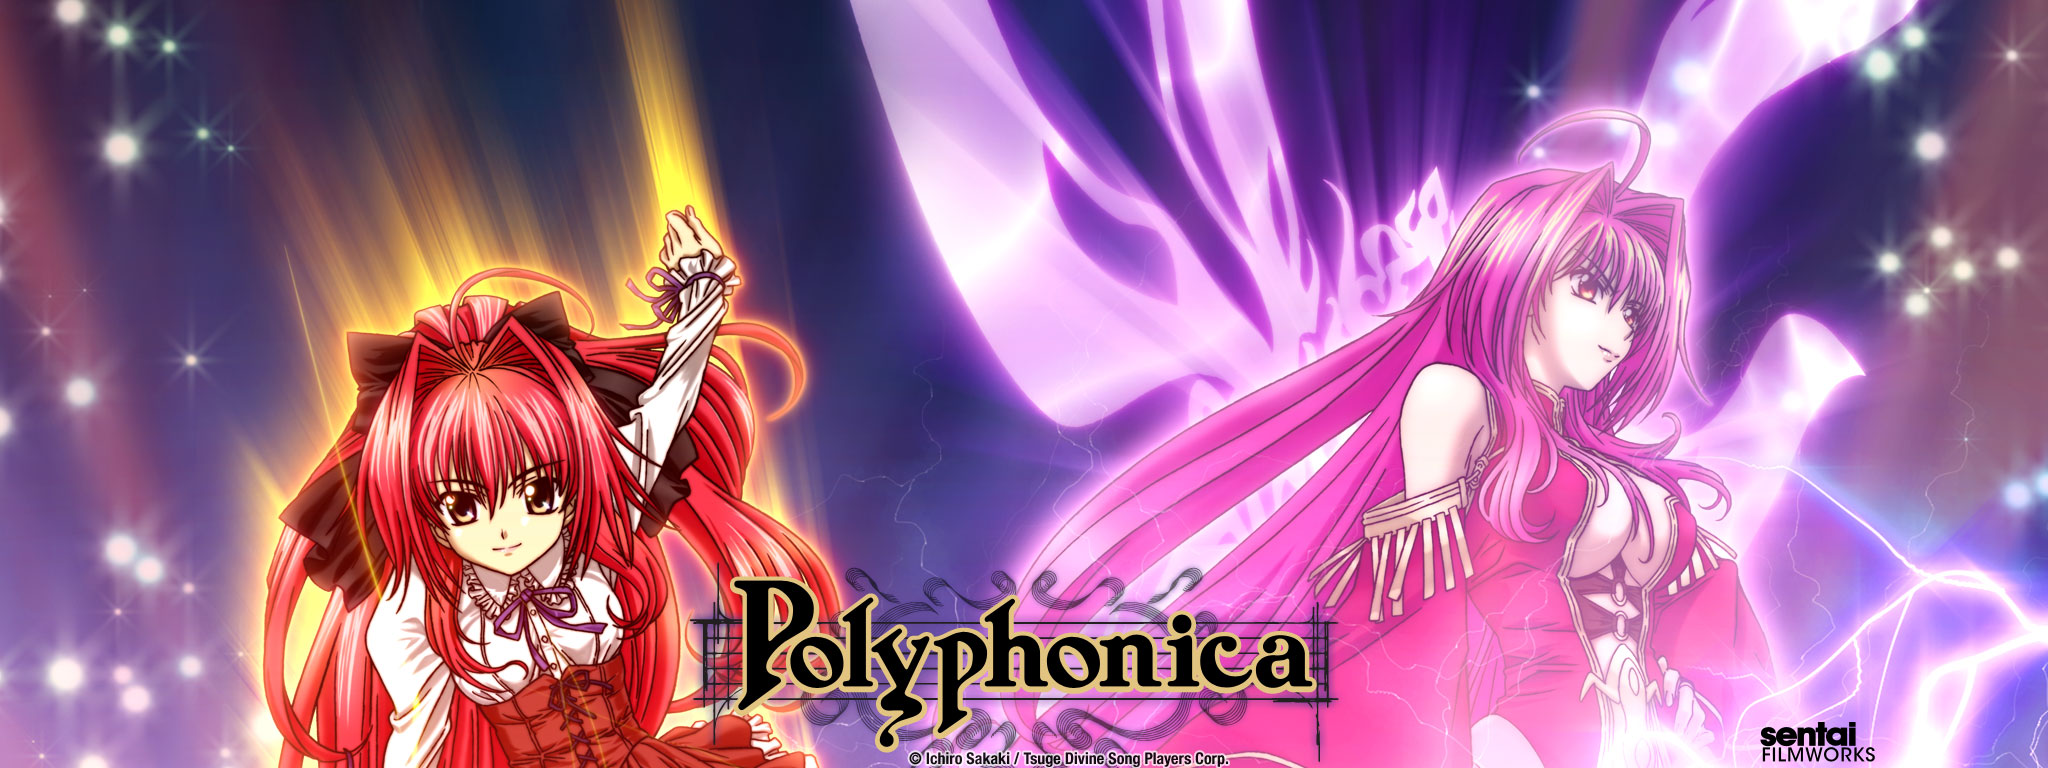 Title Art for Polyphonica